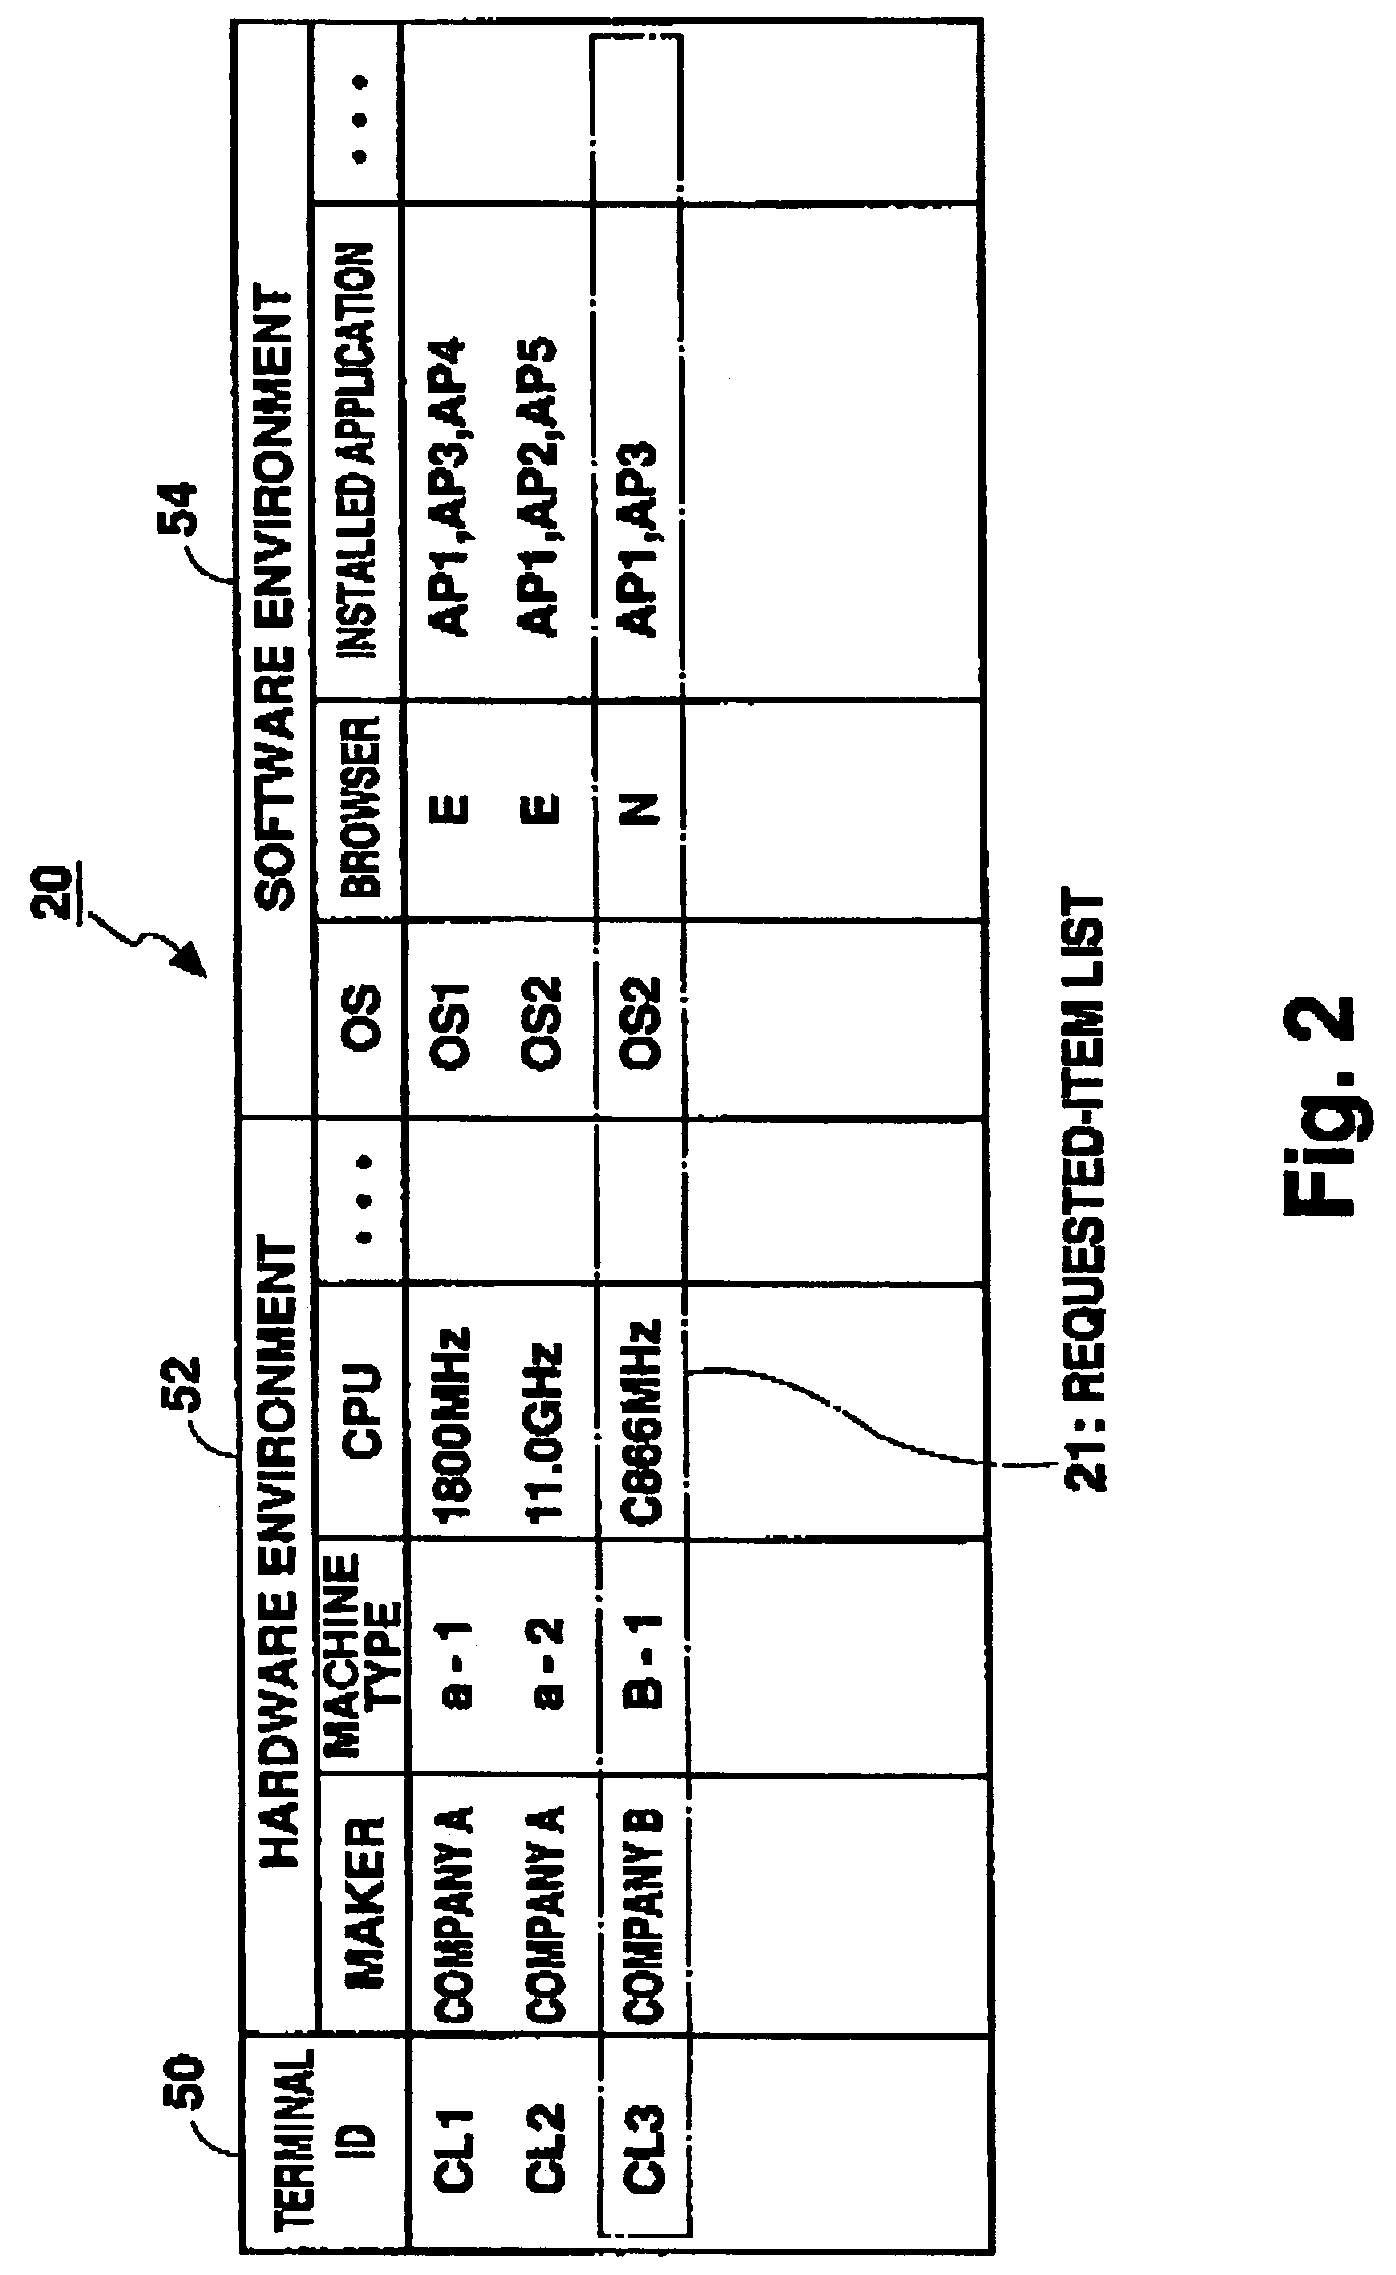 Apparatus and method for collecting information from information providing server